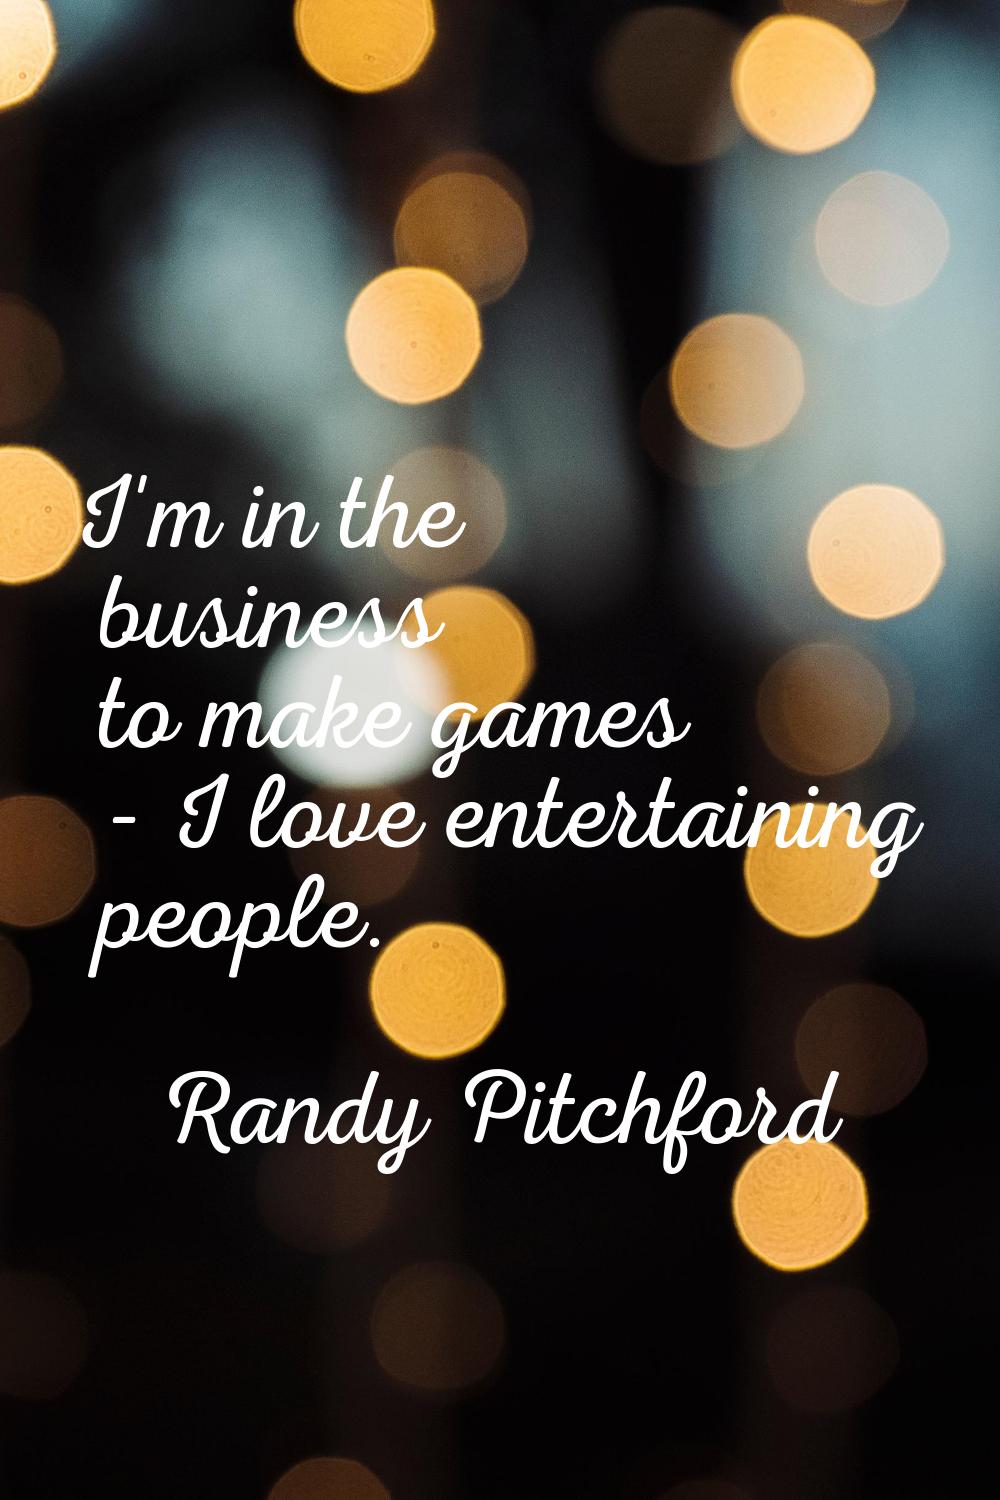 I'm in the business to make games - I love entertaining people.